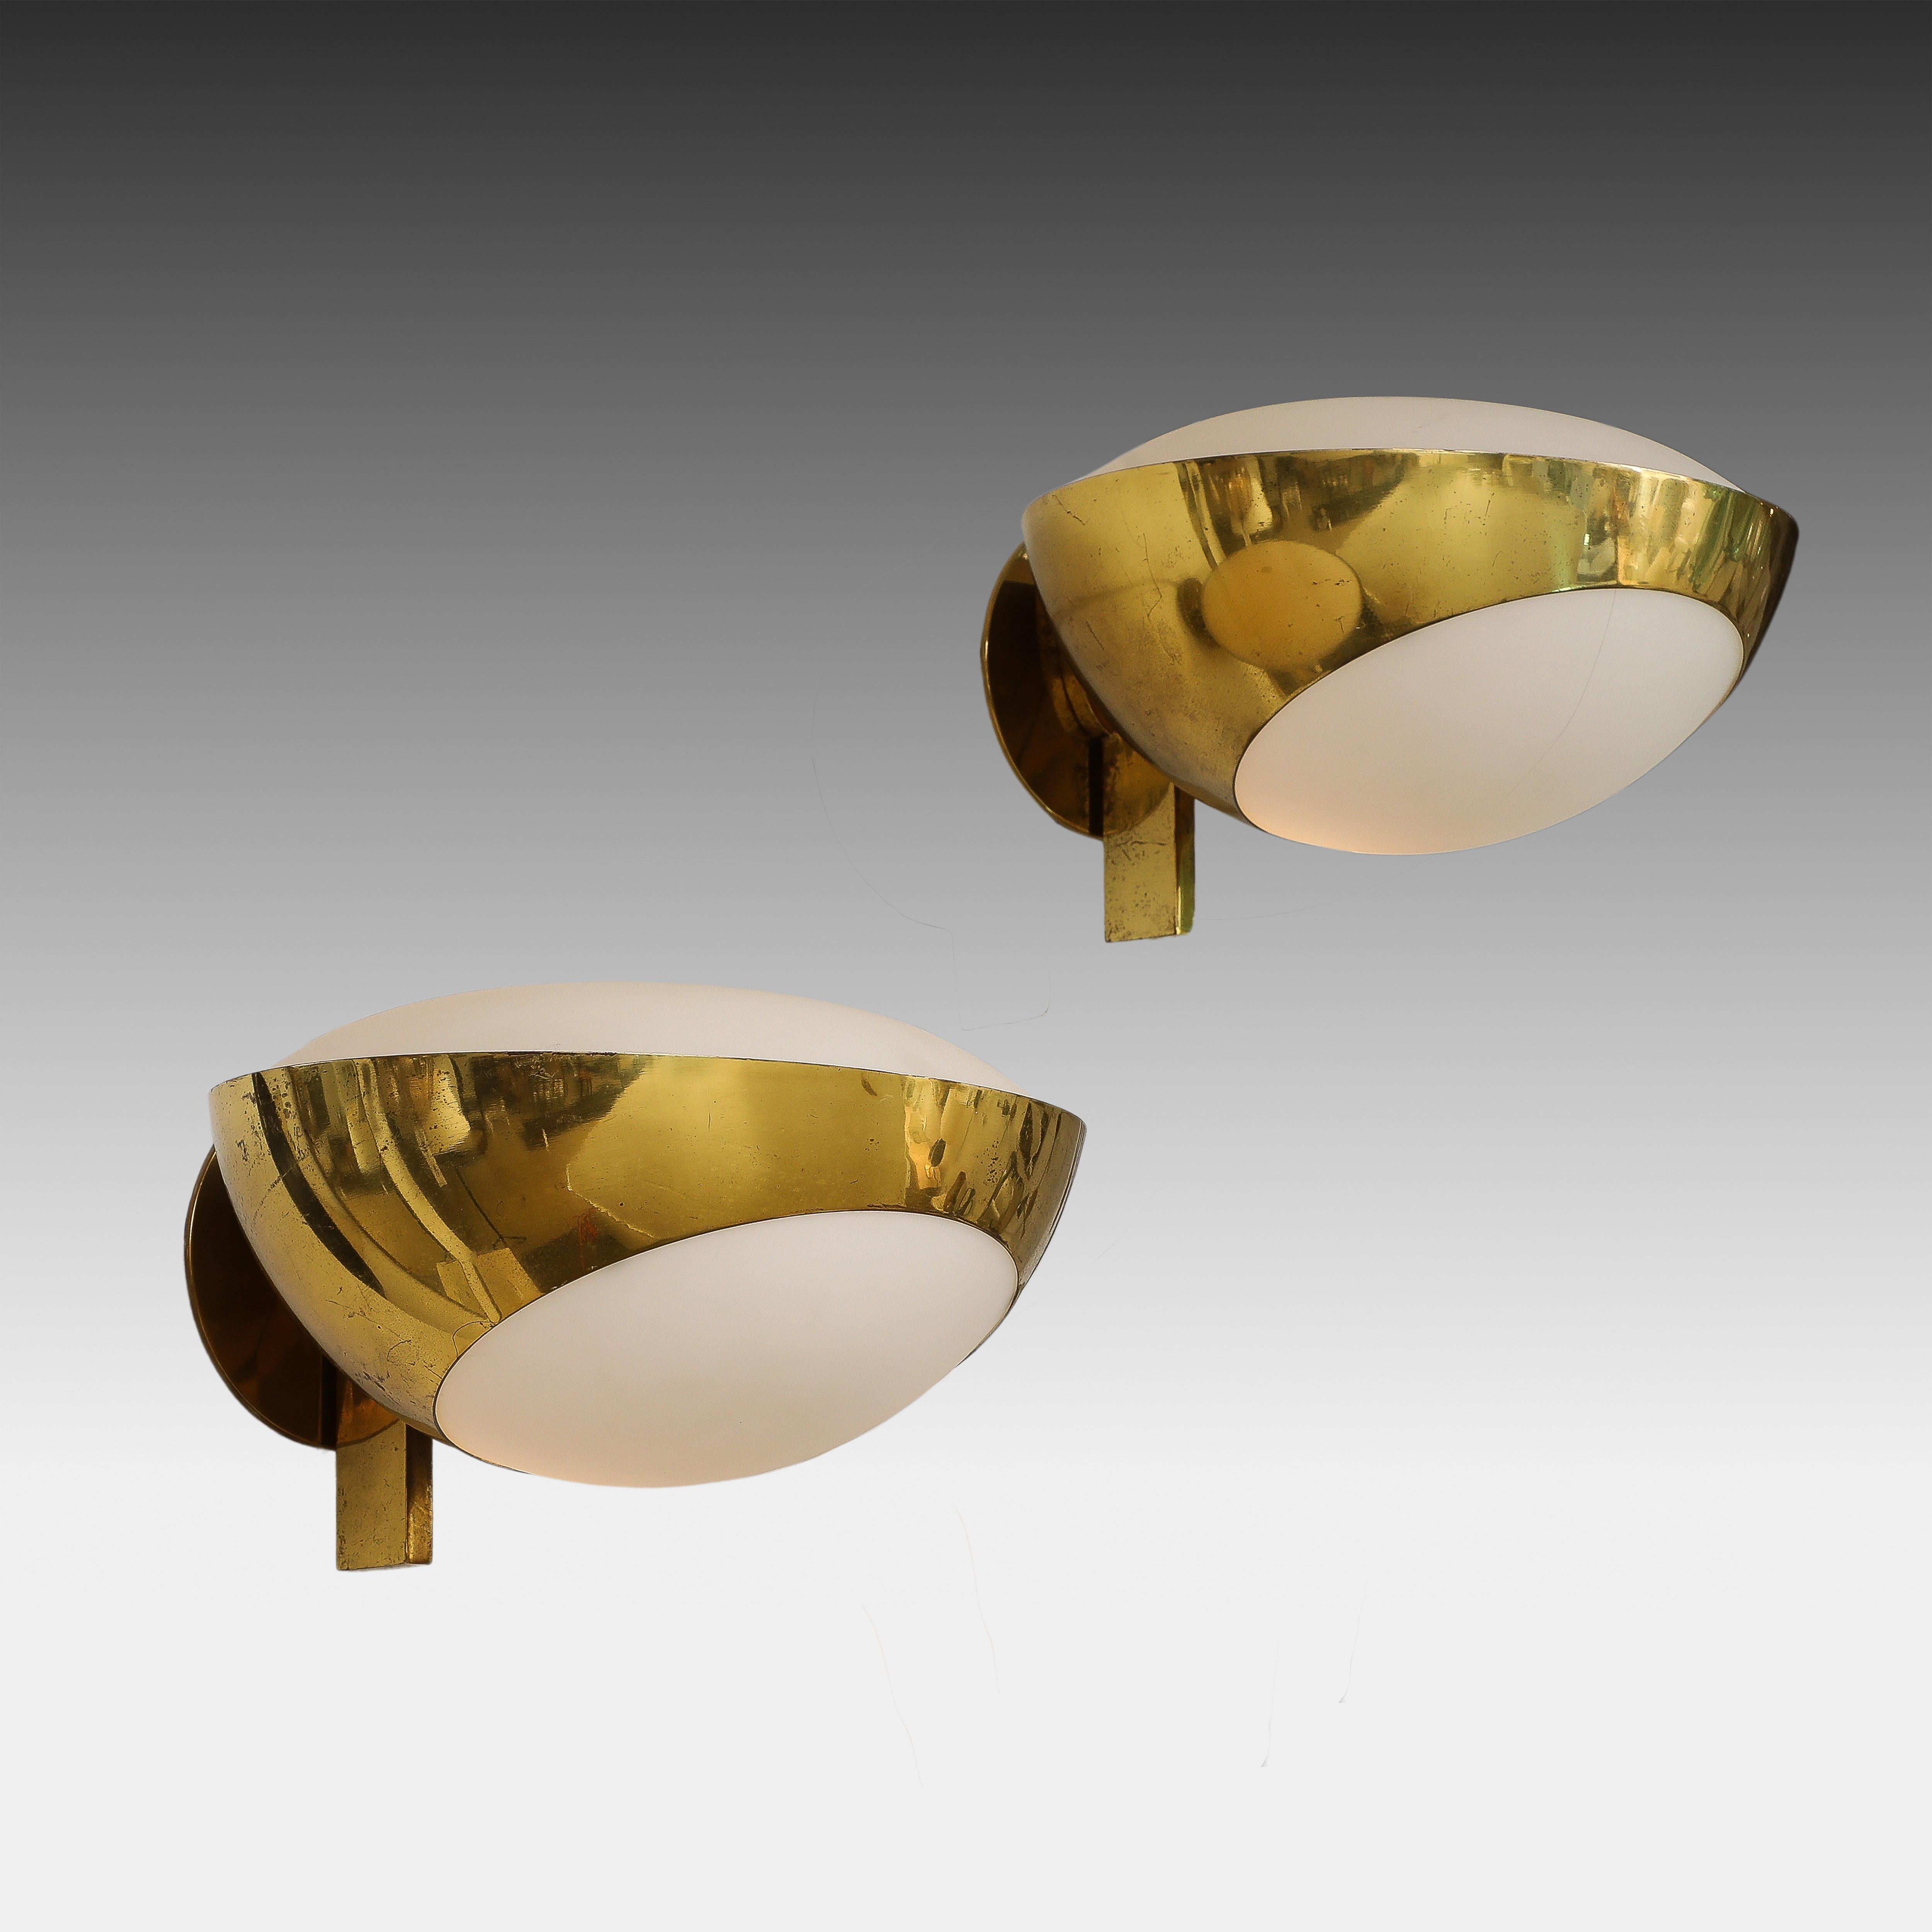 Max Ingrand for Fontana Arte rare pair of large model 1963 sconces, Italy, circa 1960. These exquisite sconces consist of brass structures which hold opaline or frosted glass diffusers below and above. This model exudes an elegance and simplicity in